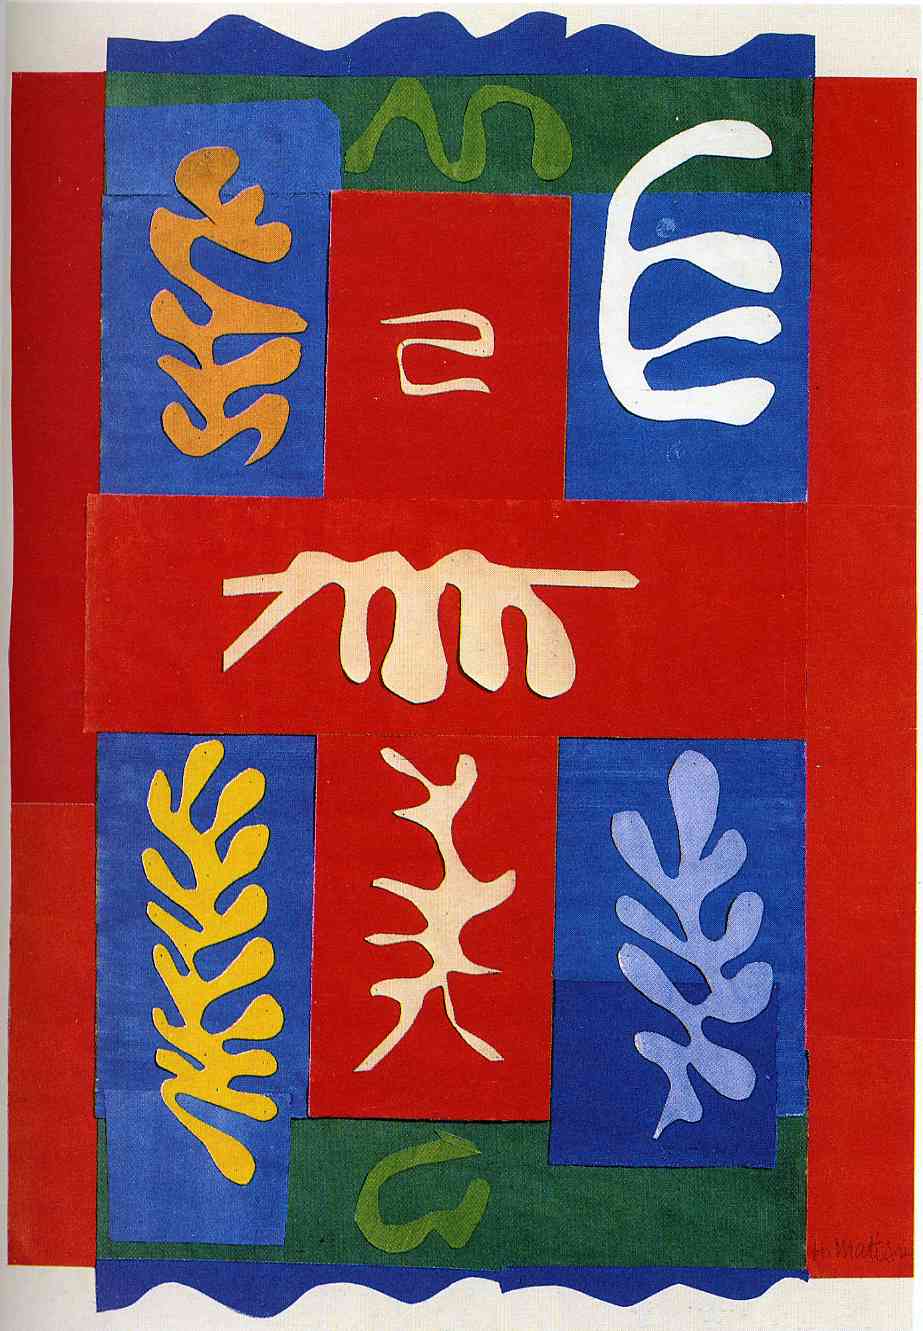 Henri Matisse - Composition with Red Cross 1947